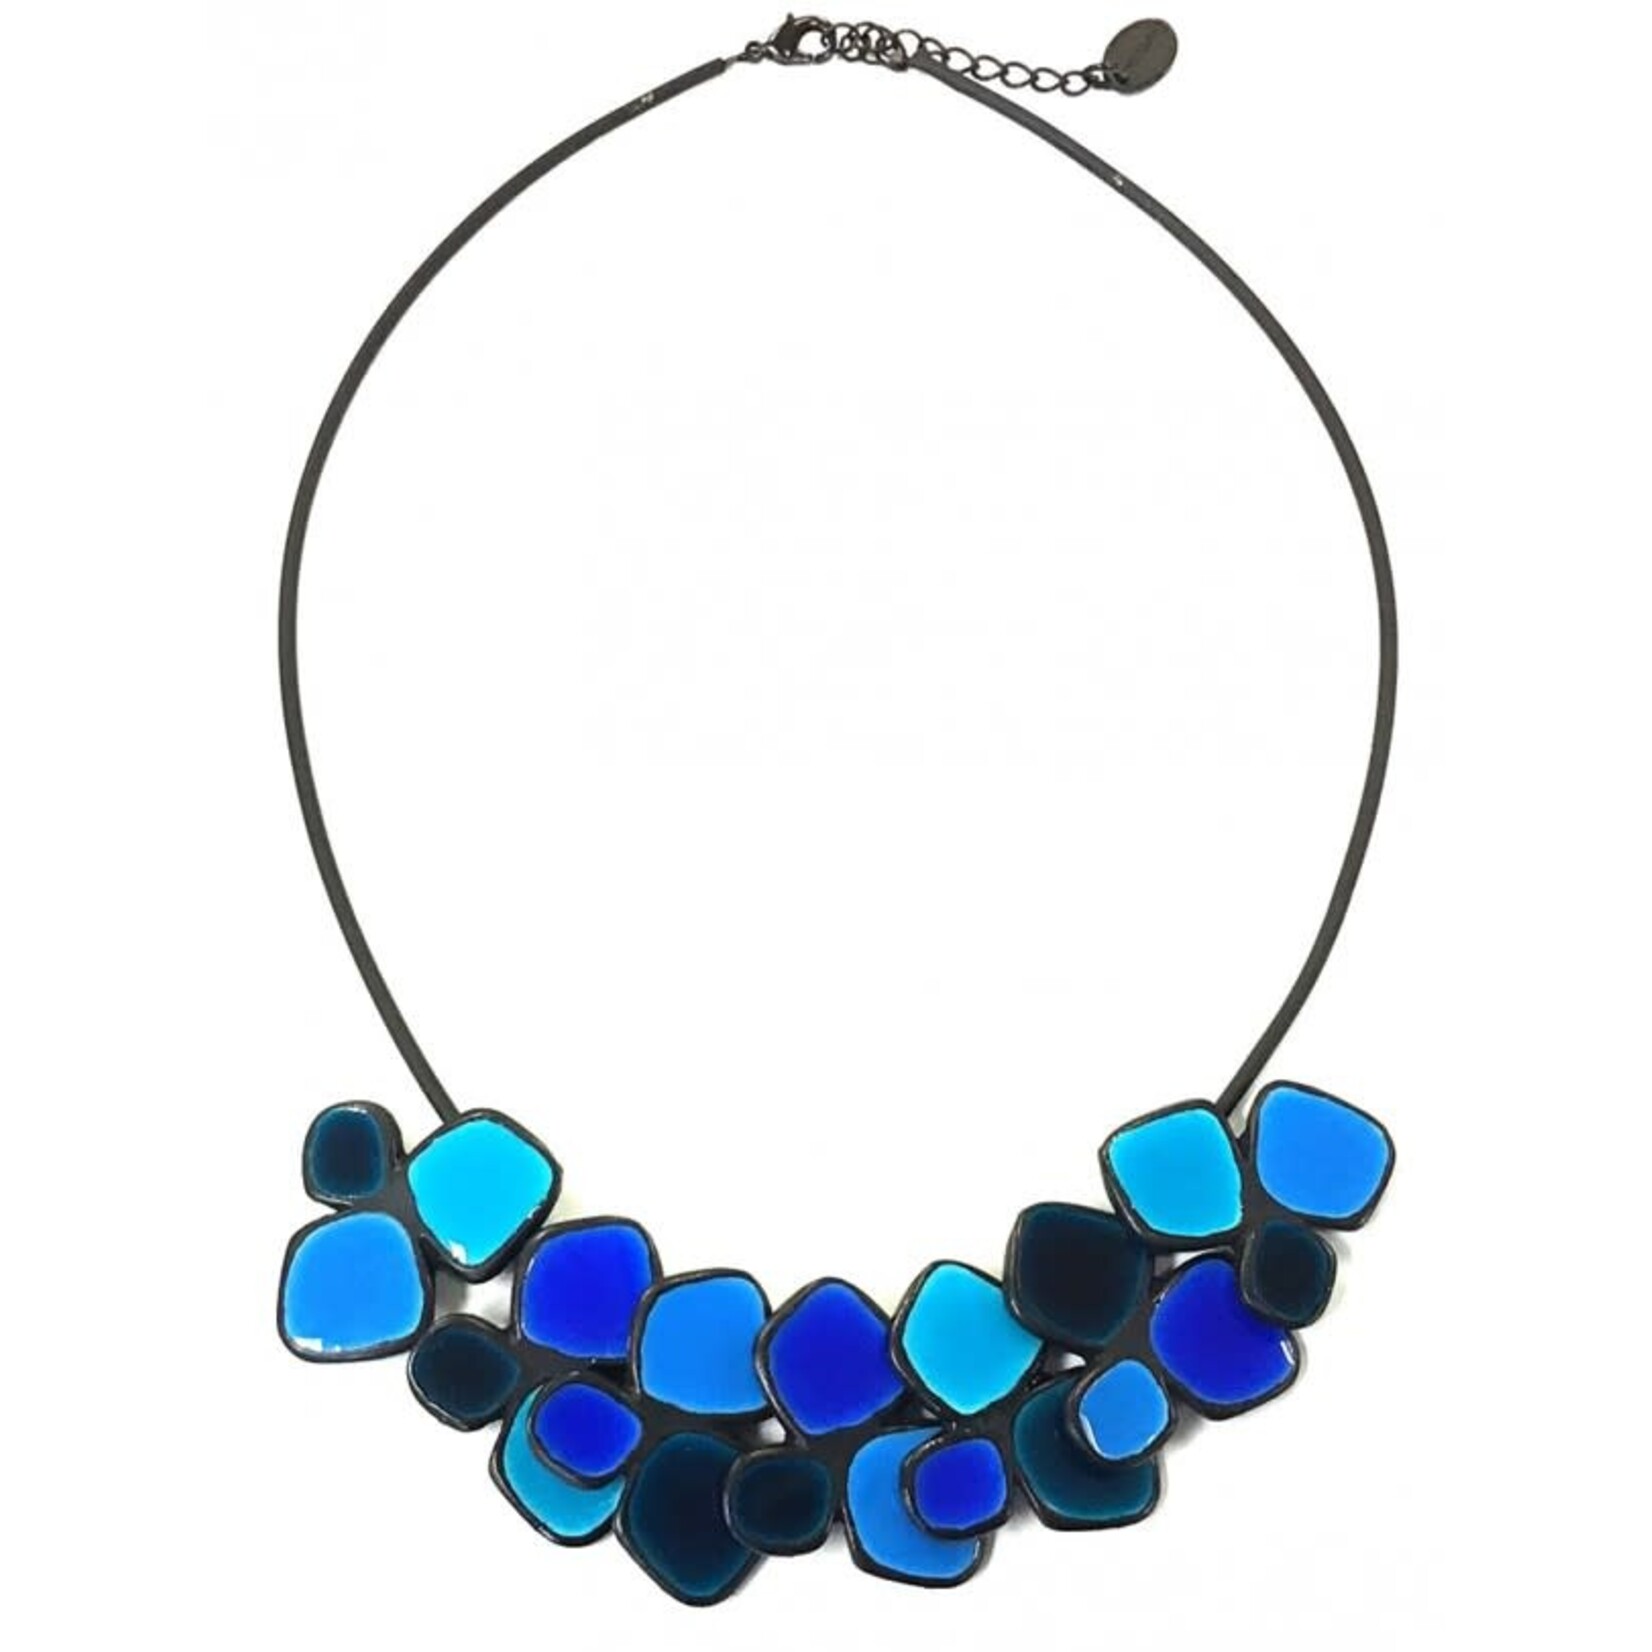 NIKAIA Lrge Cluster of Overlapping Colored Squares Necklace in Turquoise